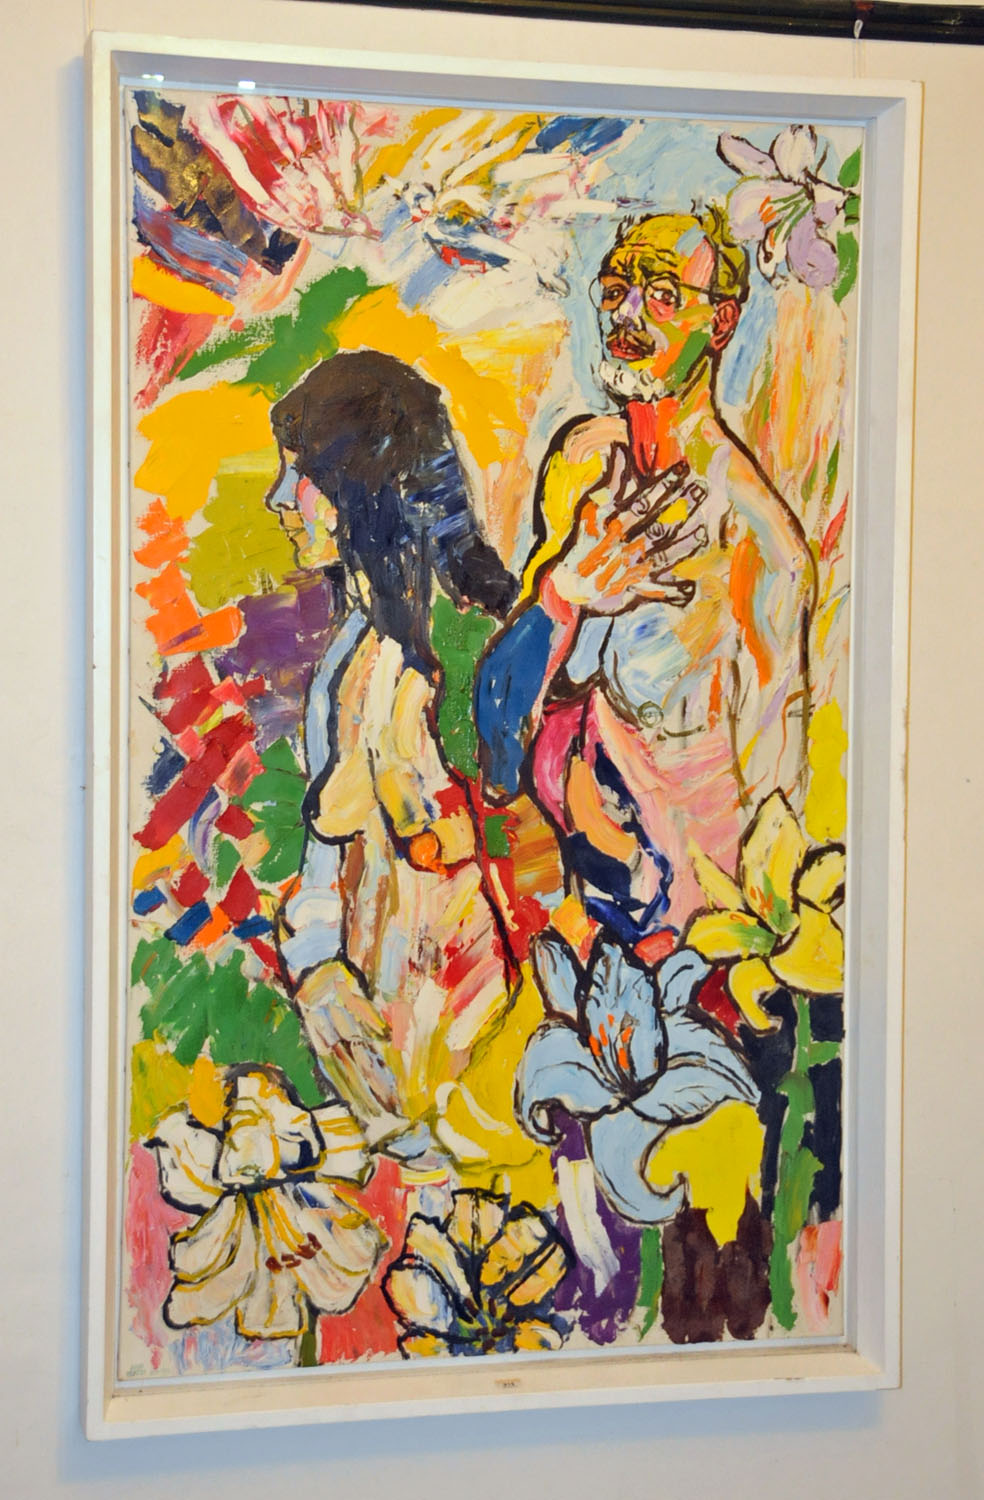 John Randall Bratby (1922-1992), oil painting on canvas, "The Artist and Diana with Lilies" 1972. - Image 12 of 12